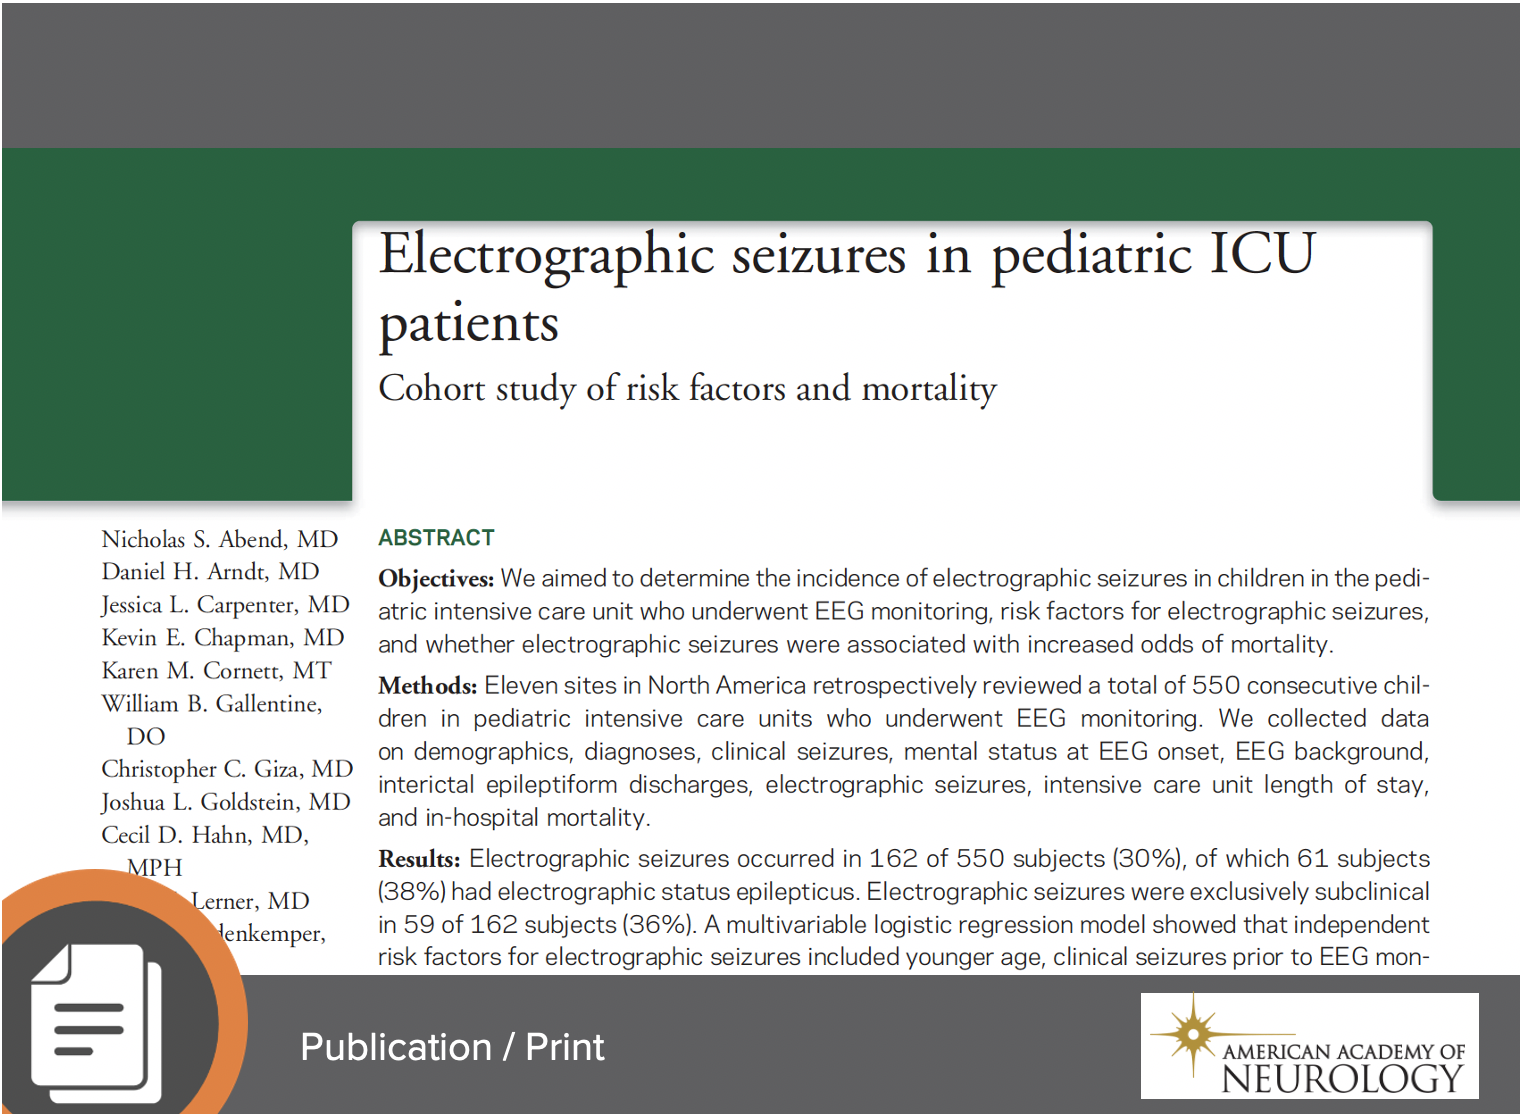 Electrographic Seizures in Pediatric ICU Patients: Cohort Study of Risk Factors and Mortality